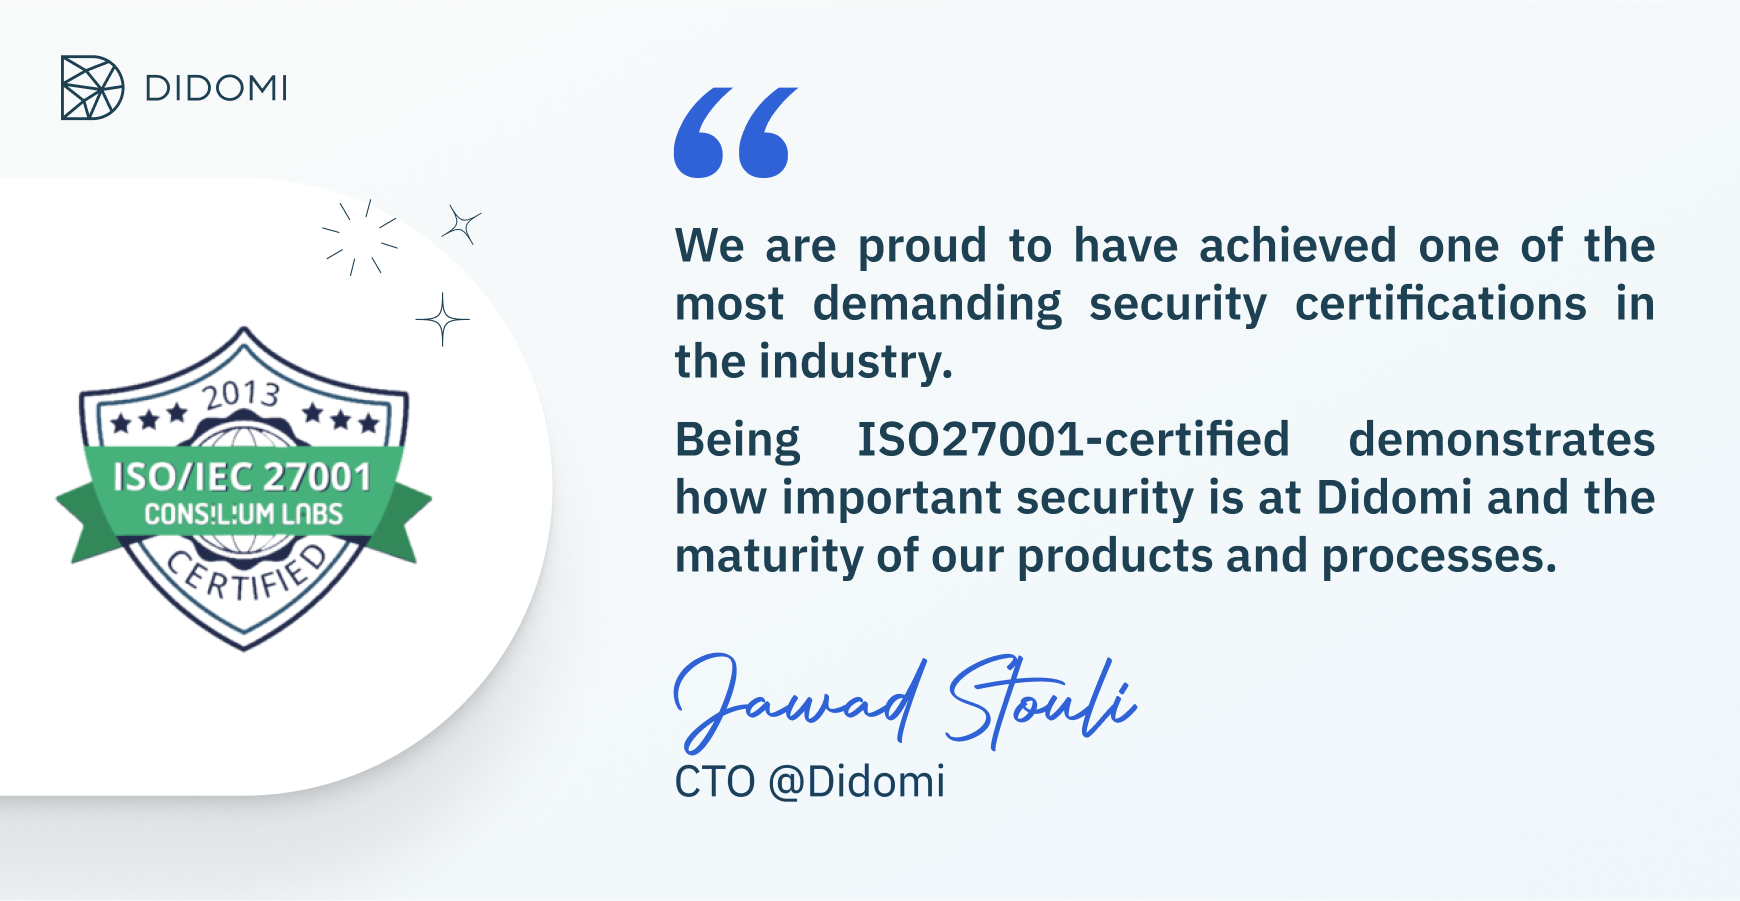 Quote from Jawad Stouli, CTO at Didomi: “We are proud to have achieved one of the most demanding security certifications in the industry. Being ISO27001-certified demonstrates how important security is at Didomi and the maturity of our products and processes”